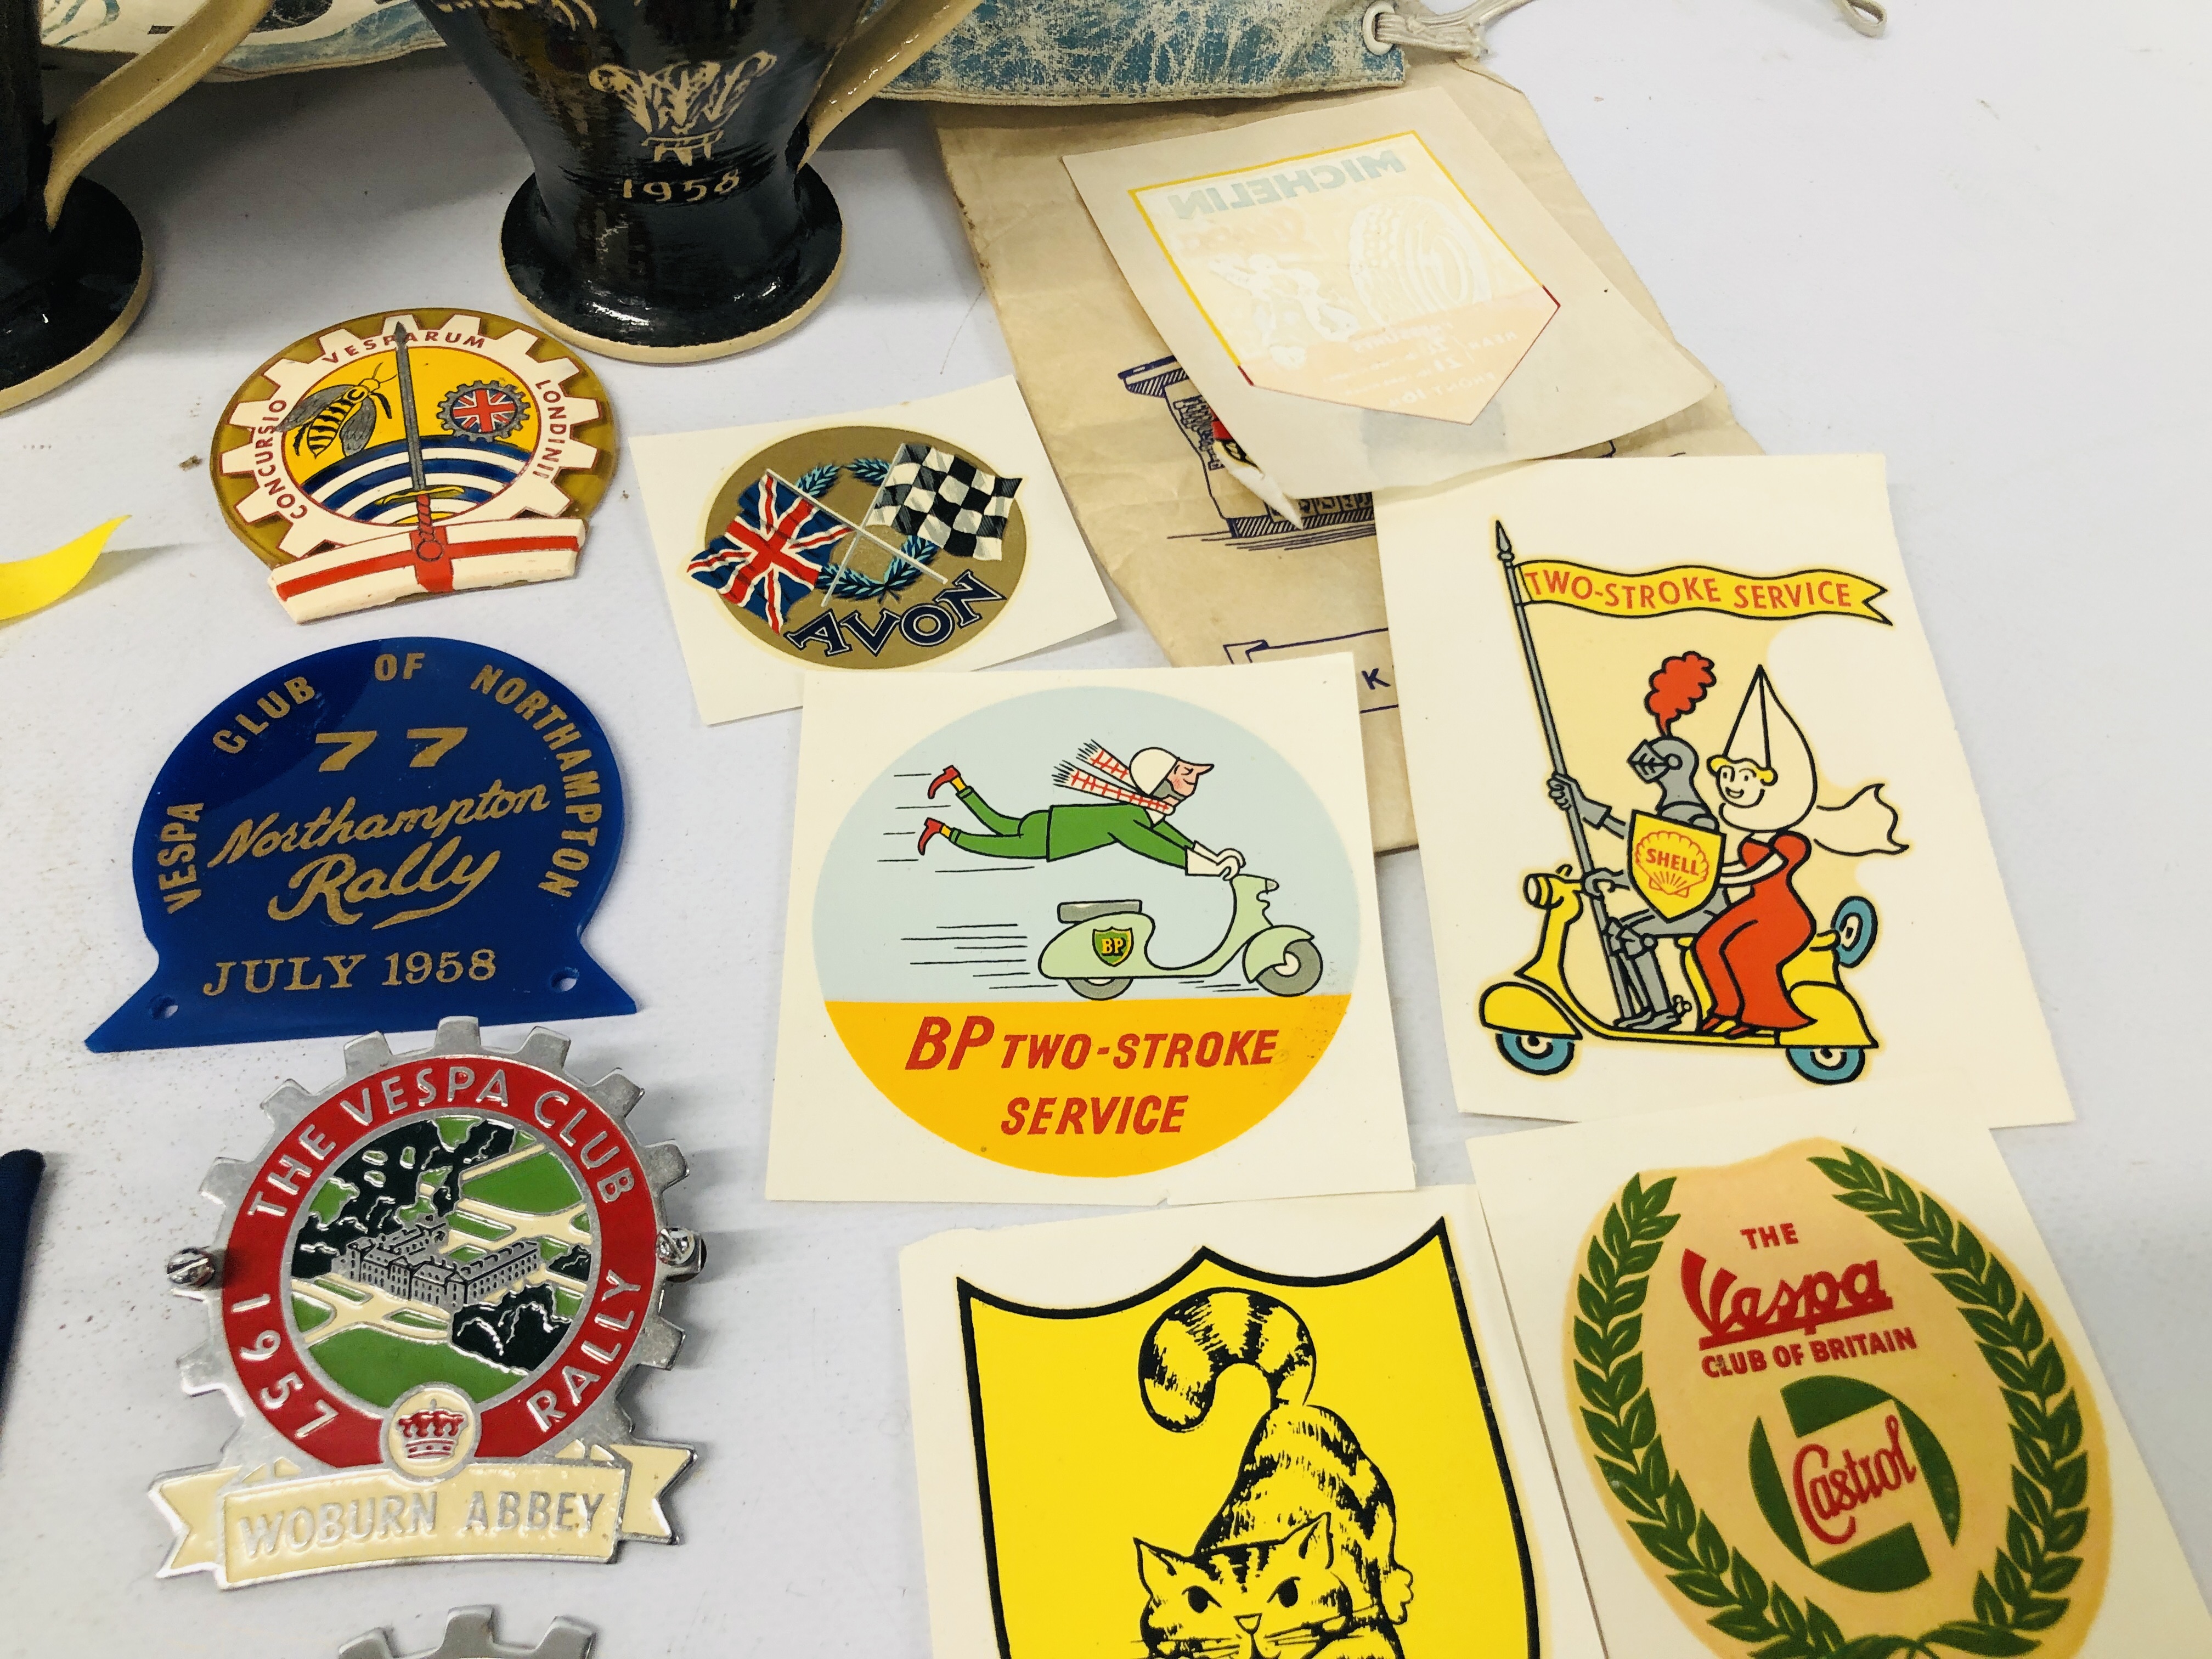 c1950s VESPA SCOOTER CLUB BADGES, PENNANTS, STICKERS, SOUTHEND ON SEA CLUB BANNER, - Image 3 of 6